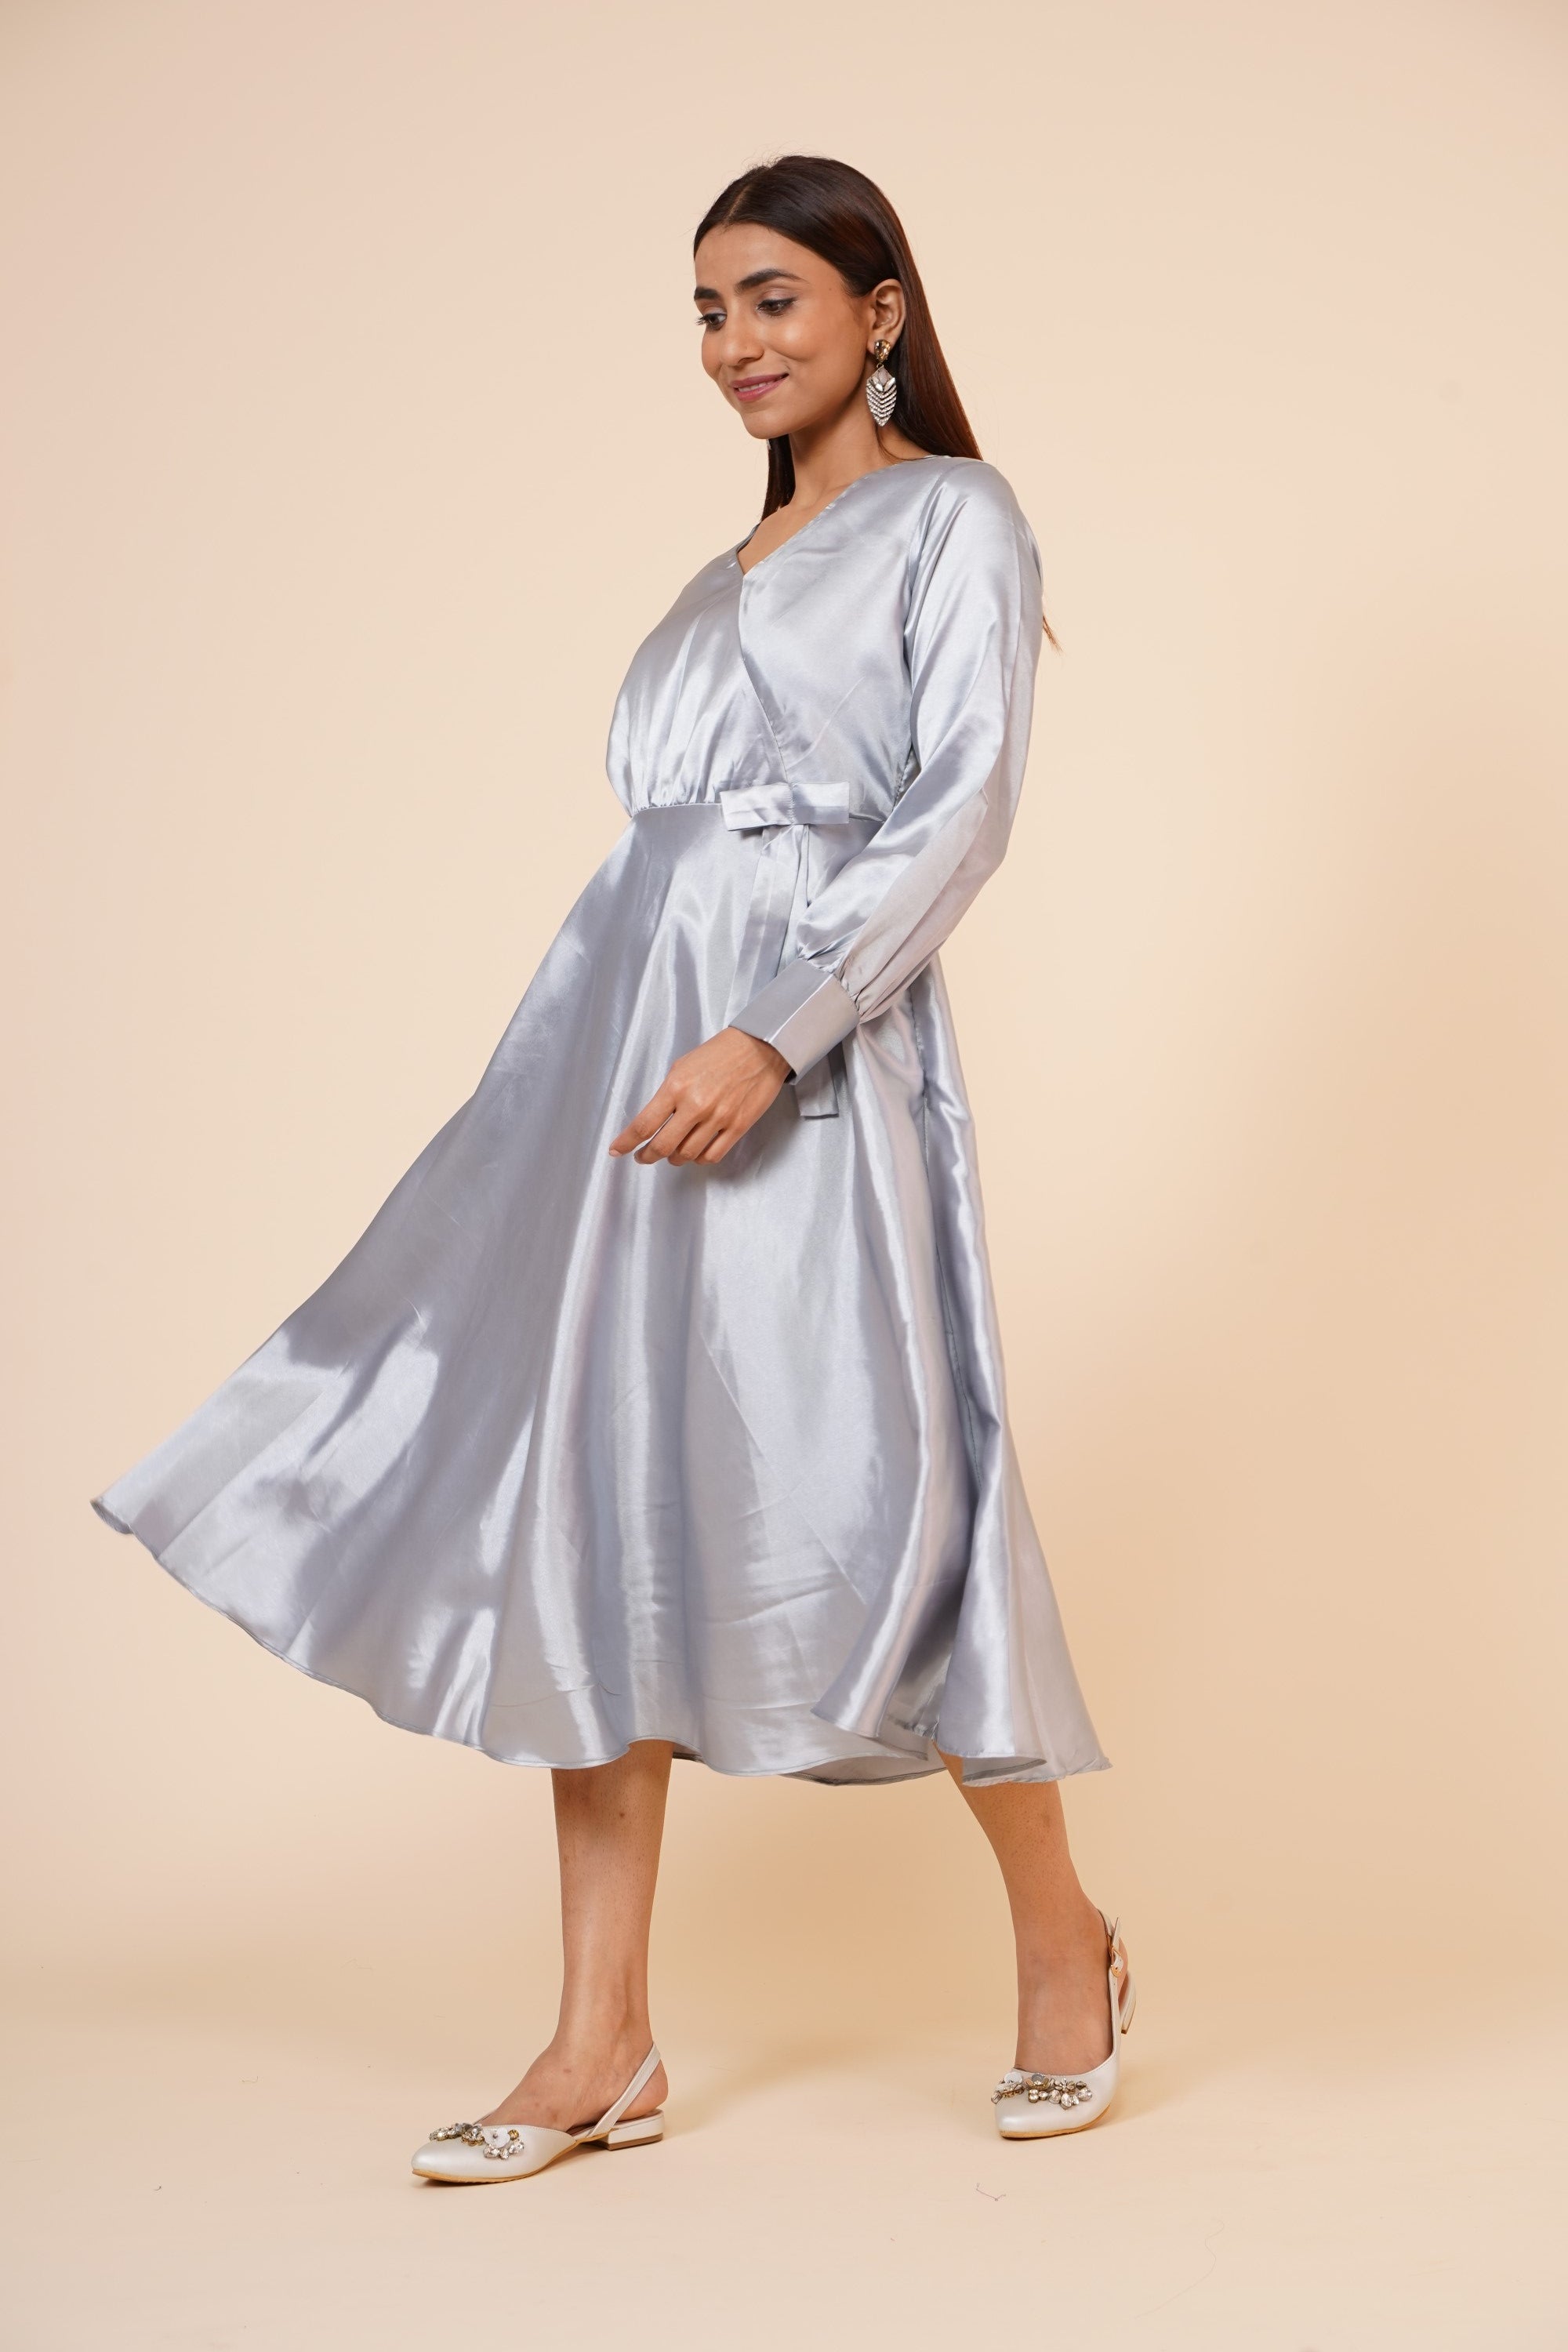 Women's Empire Line With Cuff Satin Wrap Dress Grey - MIRACOLOS by Ruchi